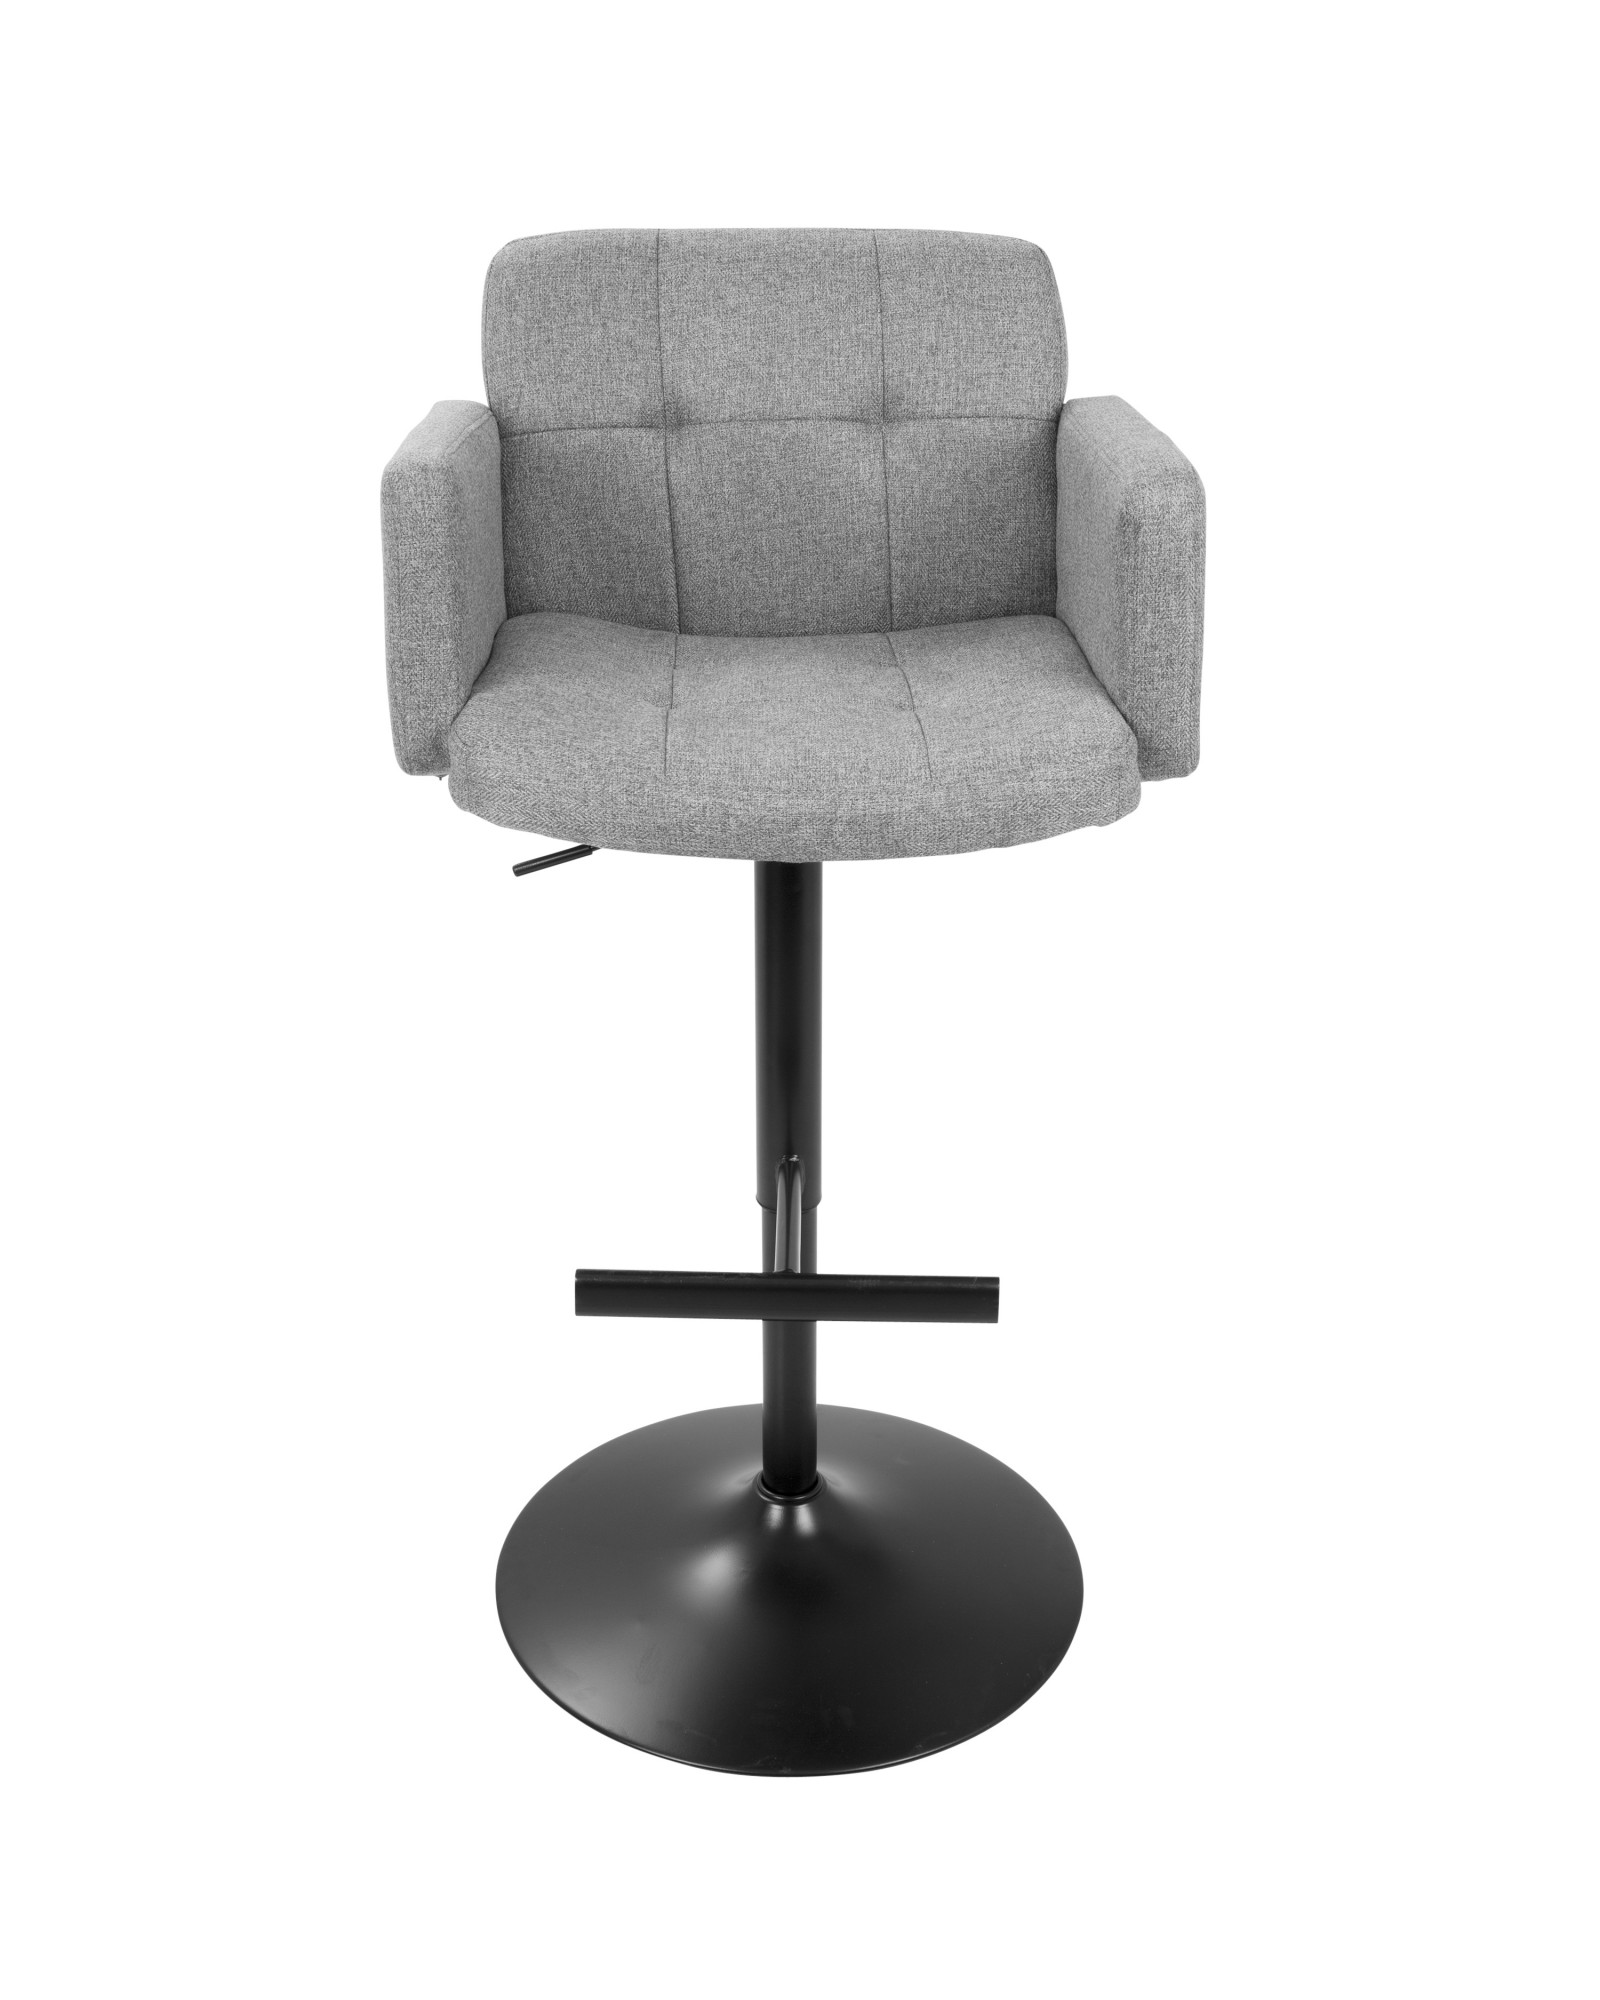 Stout Contemporary Adjustable Barstool with Swivel in Black with Grey Fabric